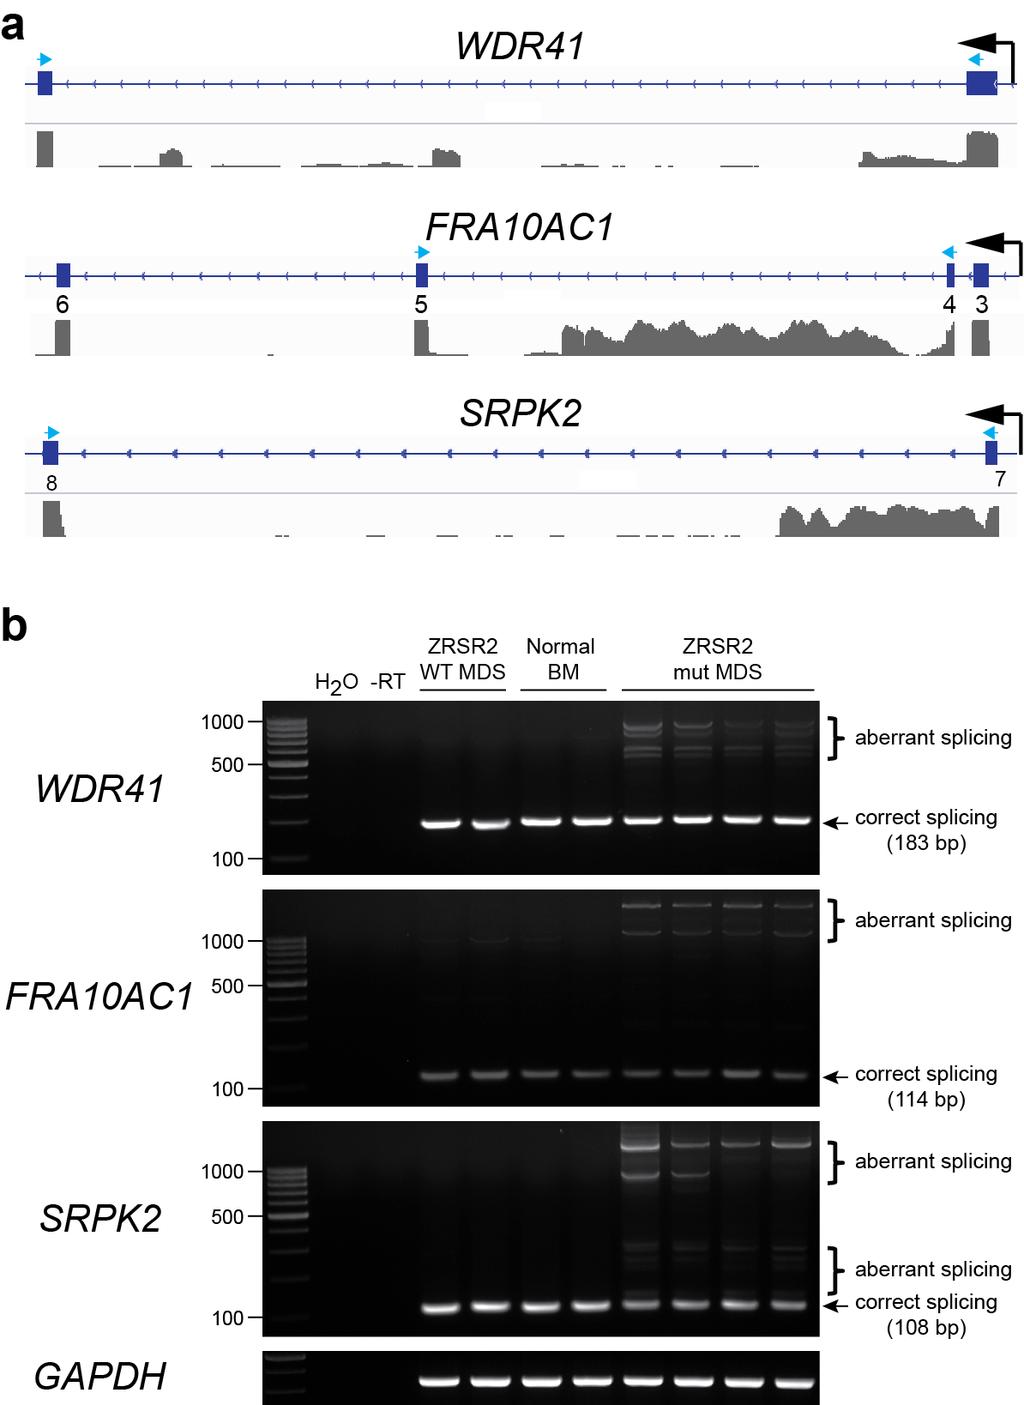 Supplementary Figure 12 Supplementary Fig. 12 RT-PCR analysis verifies presence of aberrant transcripts of WDR41, FRA10AC1 and SRPK2 in ZRSR2 mutant MDS.